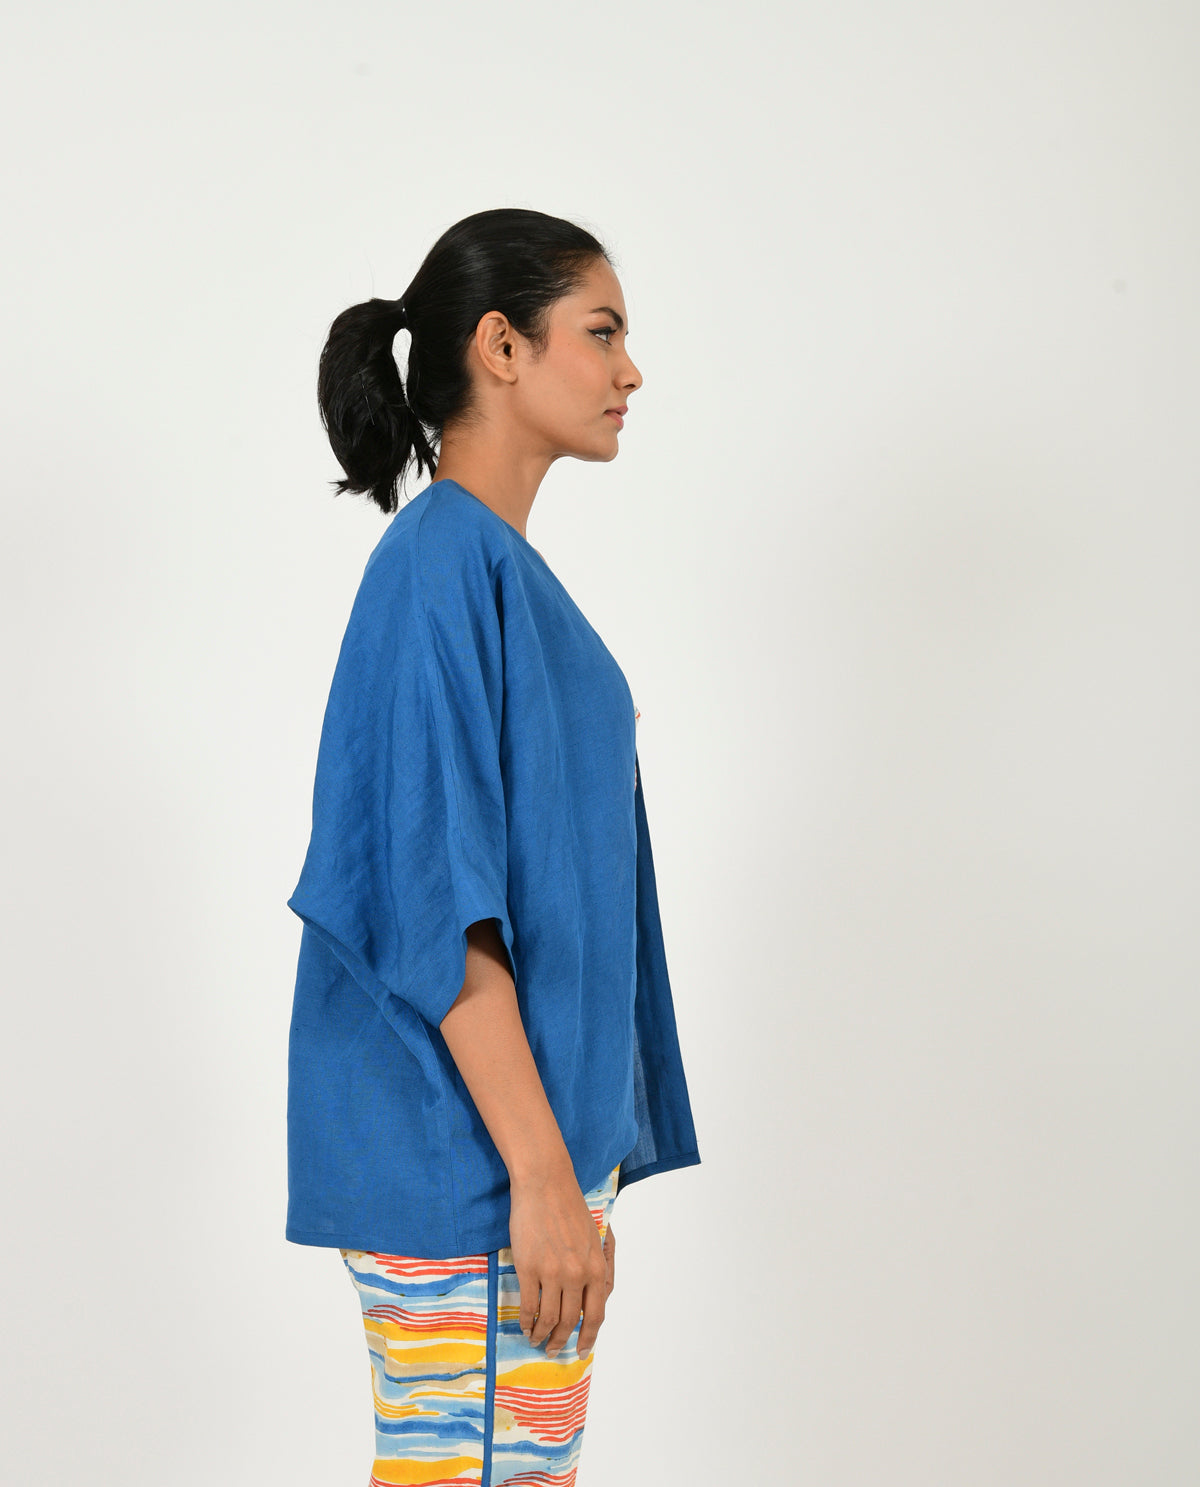 Blue Linen Overlay at Kamakhyaa by Rias Jaipur. This item is Blue, Casual Wear, Linen Blend, Natural, Relaxed Fit, Shrugs, Solids, Womenswear, Yaadein